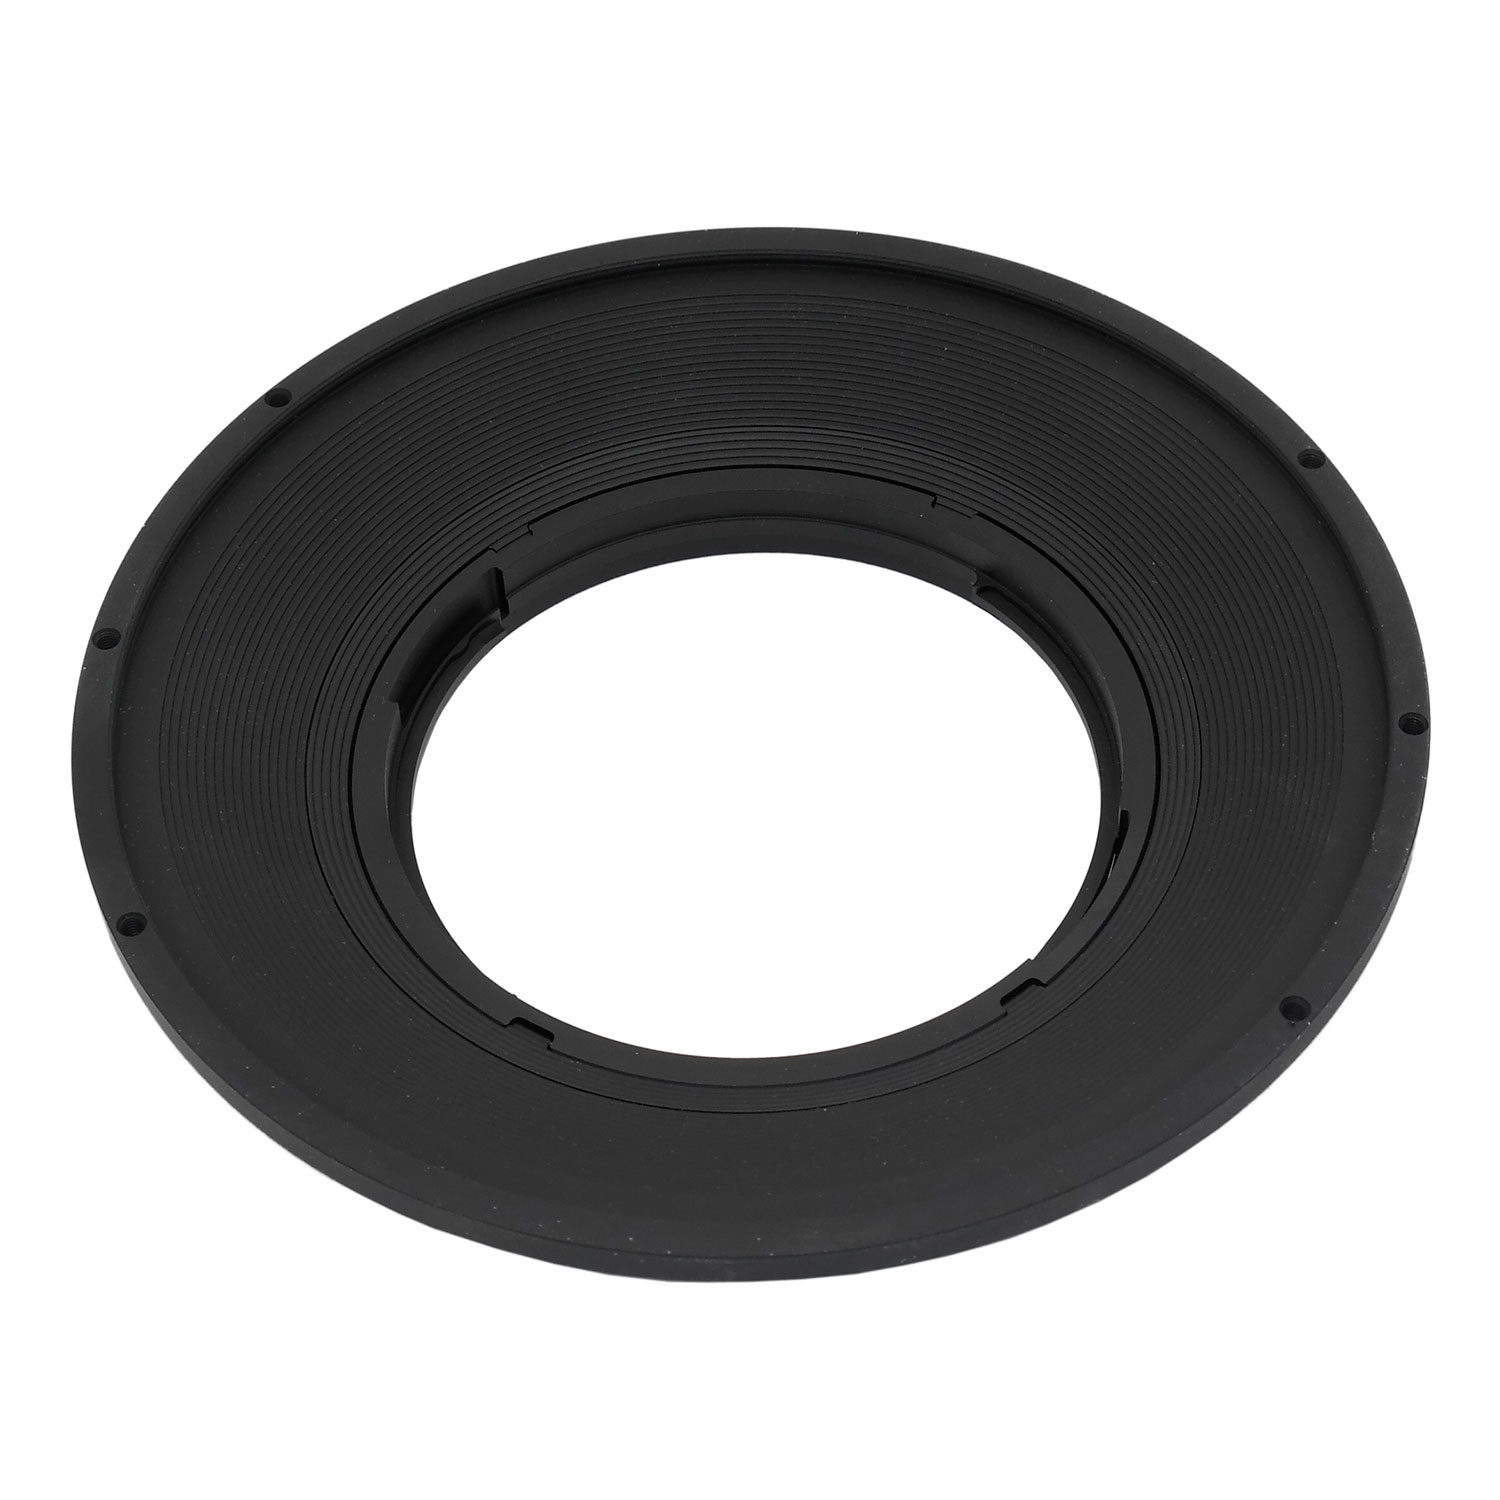 Image of Athabasca Filter Adapter System voor Canon 17mm TS-E